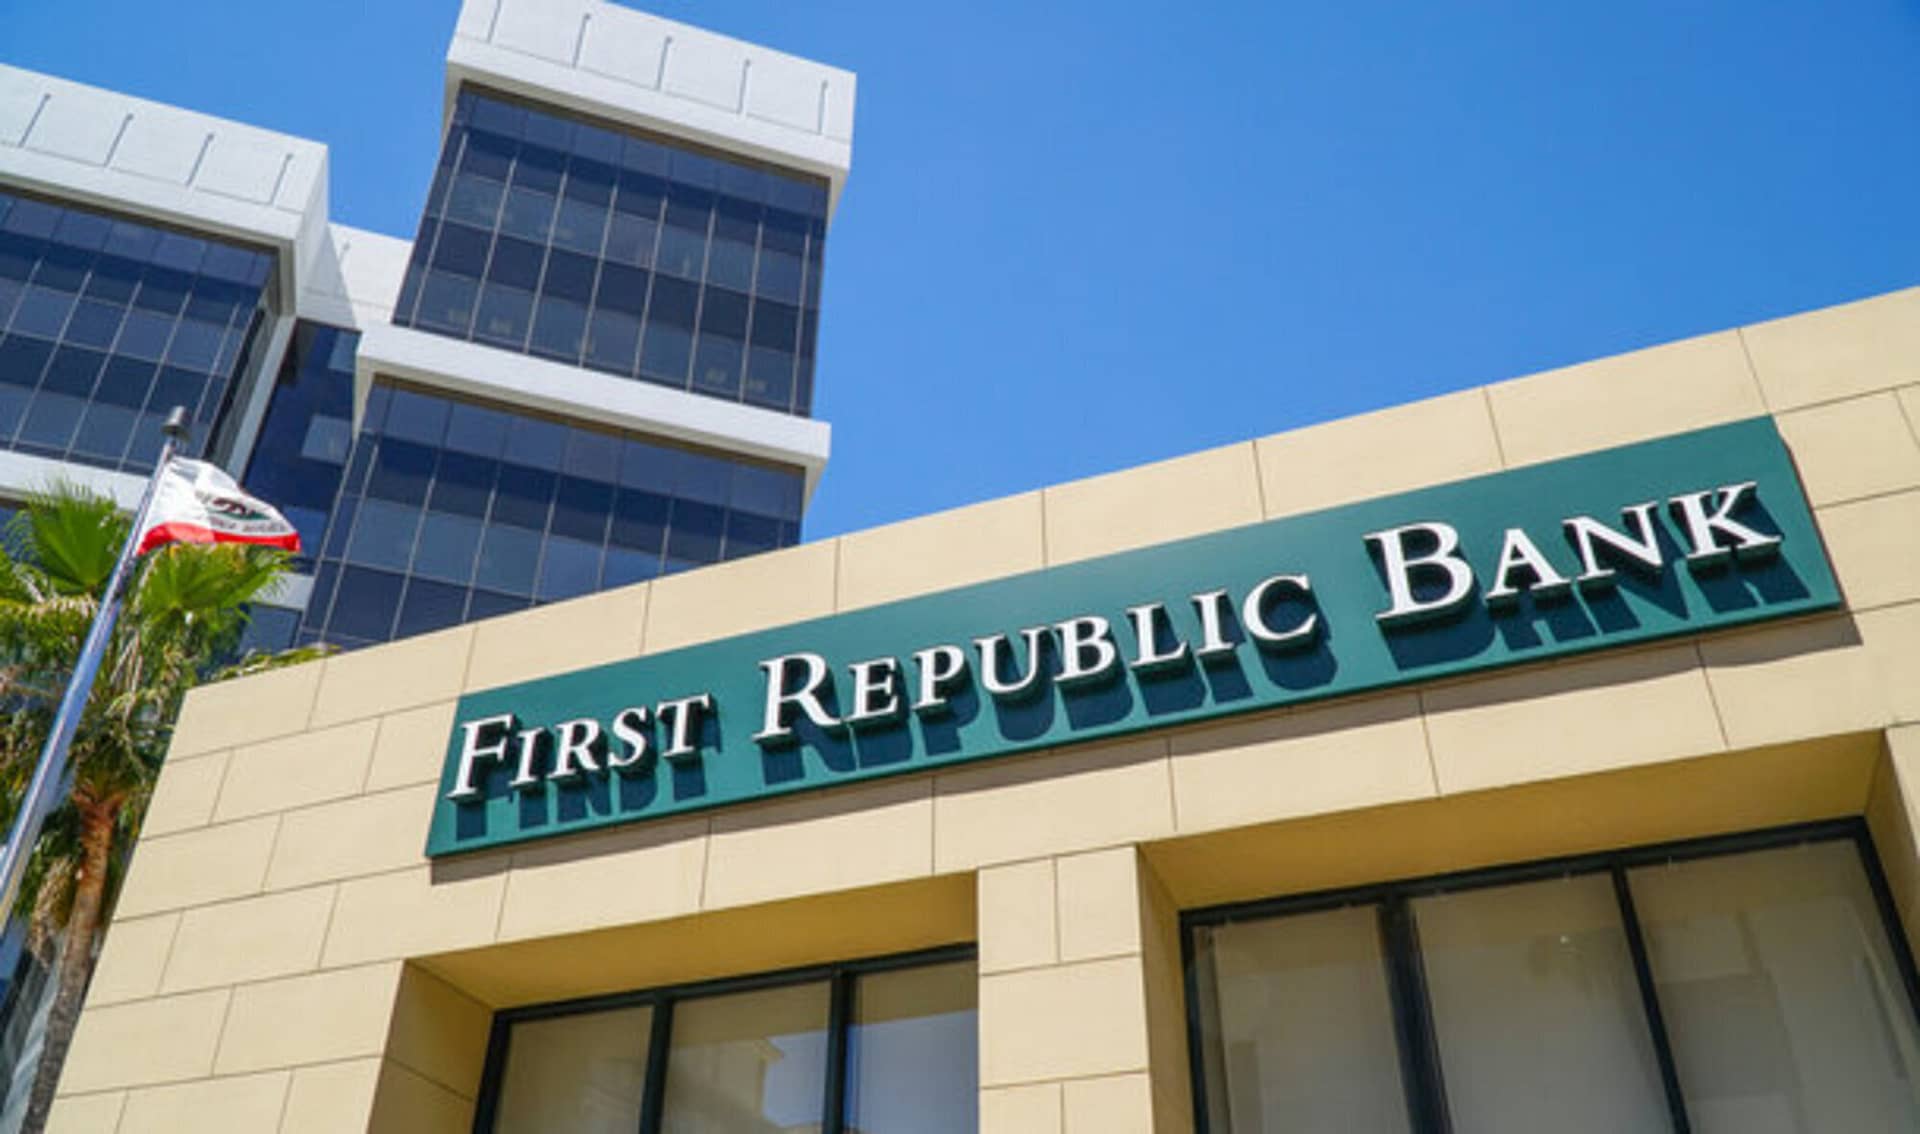 Building of the First Republic Bank